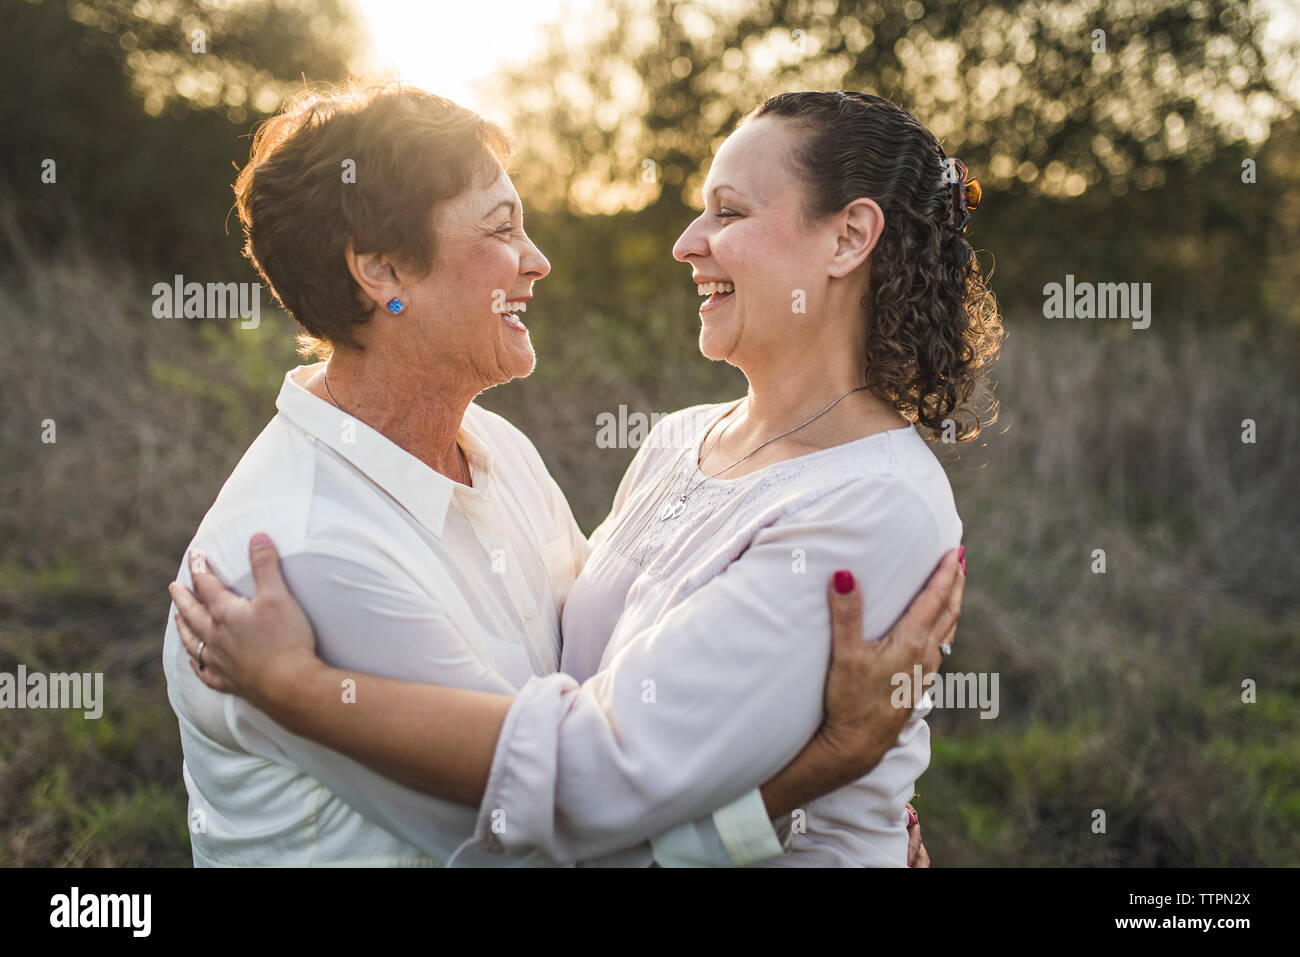 Close up portrait of adult mother and daughter embracing and laughing Stock Photo